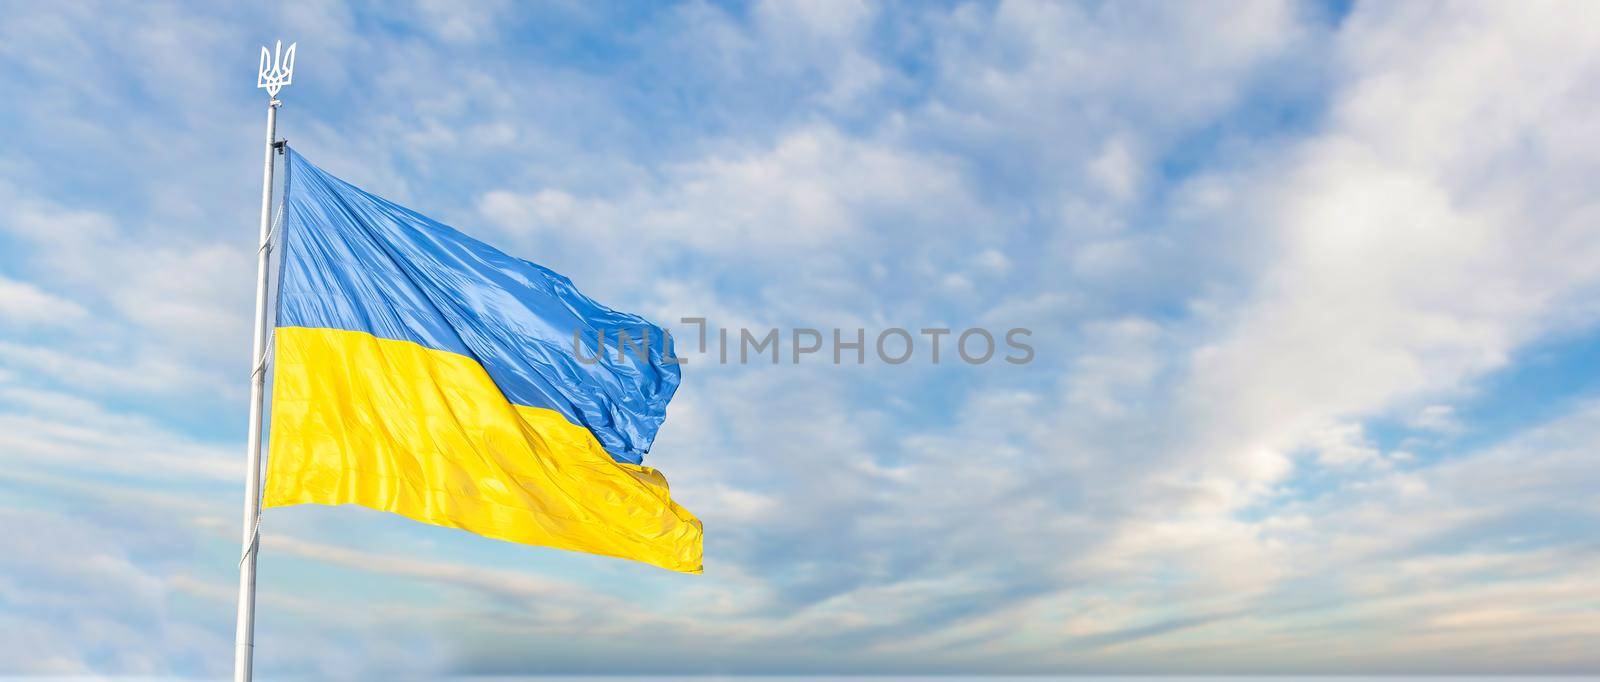 Large national flag of Ukraine flies in the blue sky. Big yellow blue Ukrainian state banner. Independence, flag, Constitution Day, National Holiday, text space